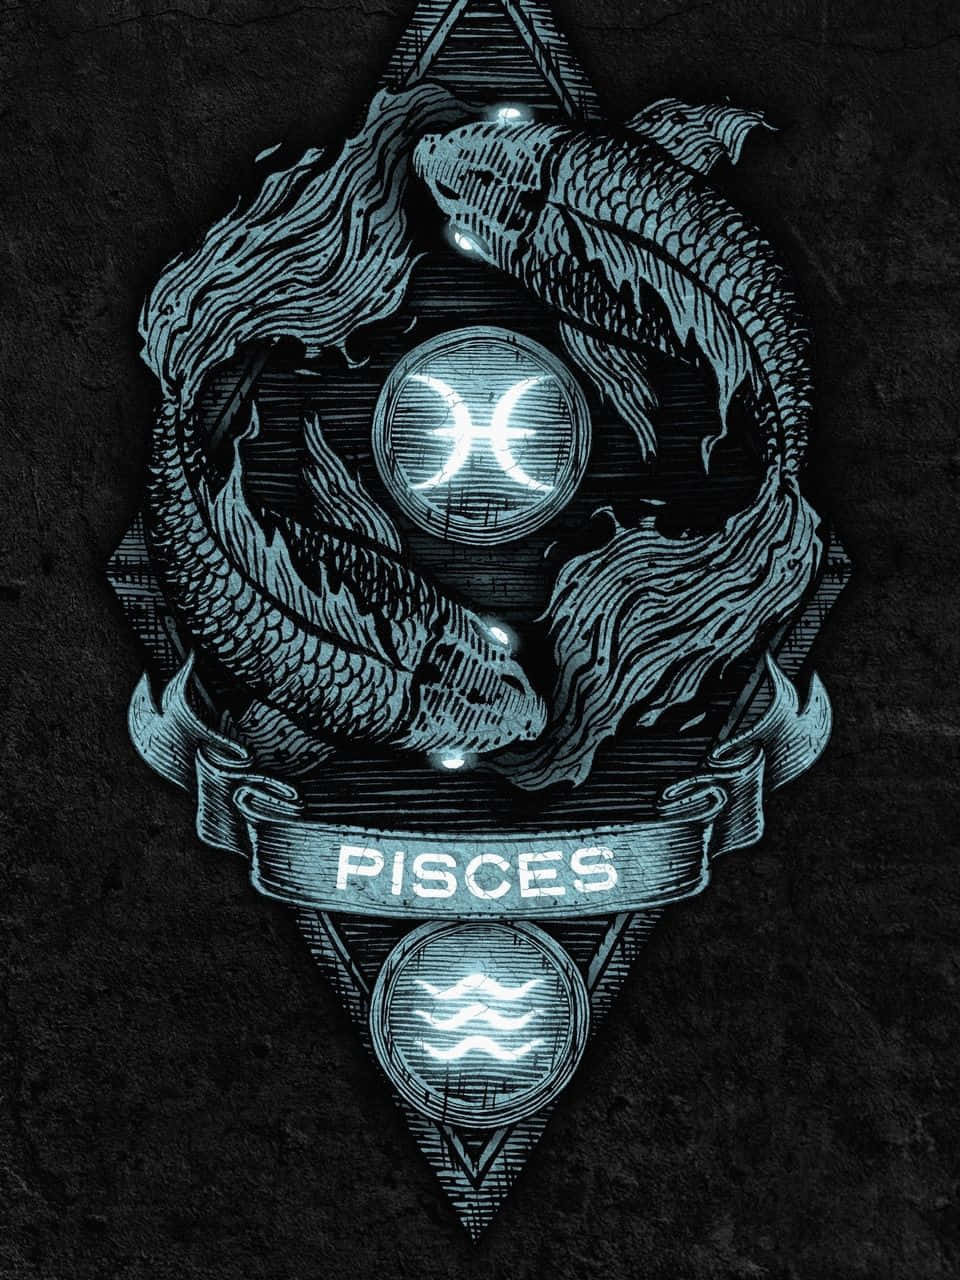 A beautiful image of an ornate Pisces symbol.